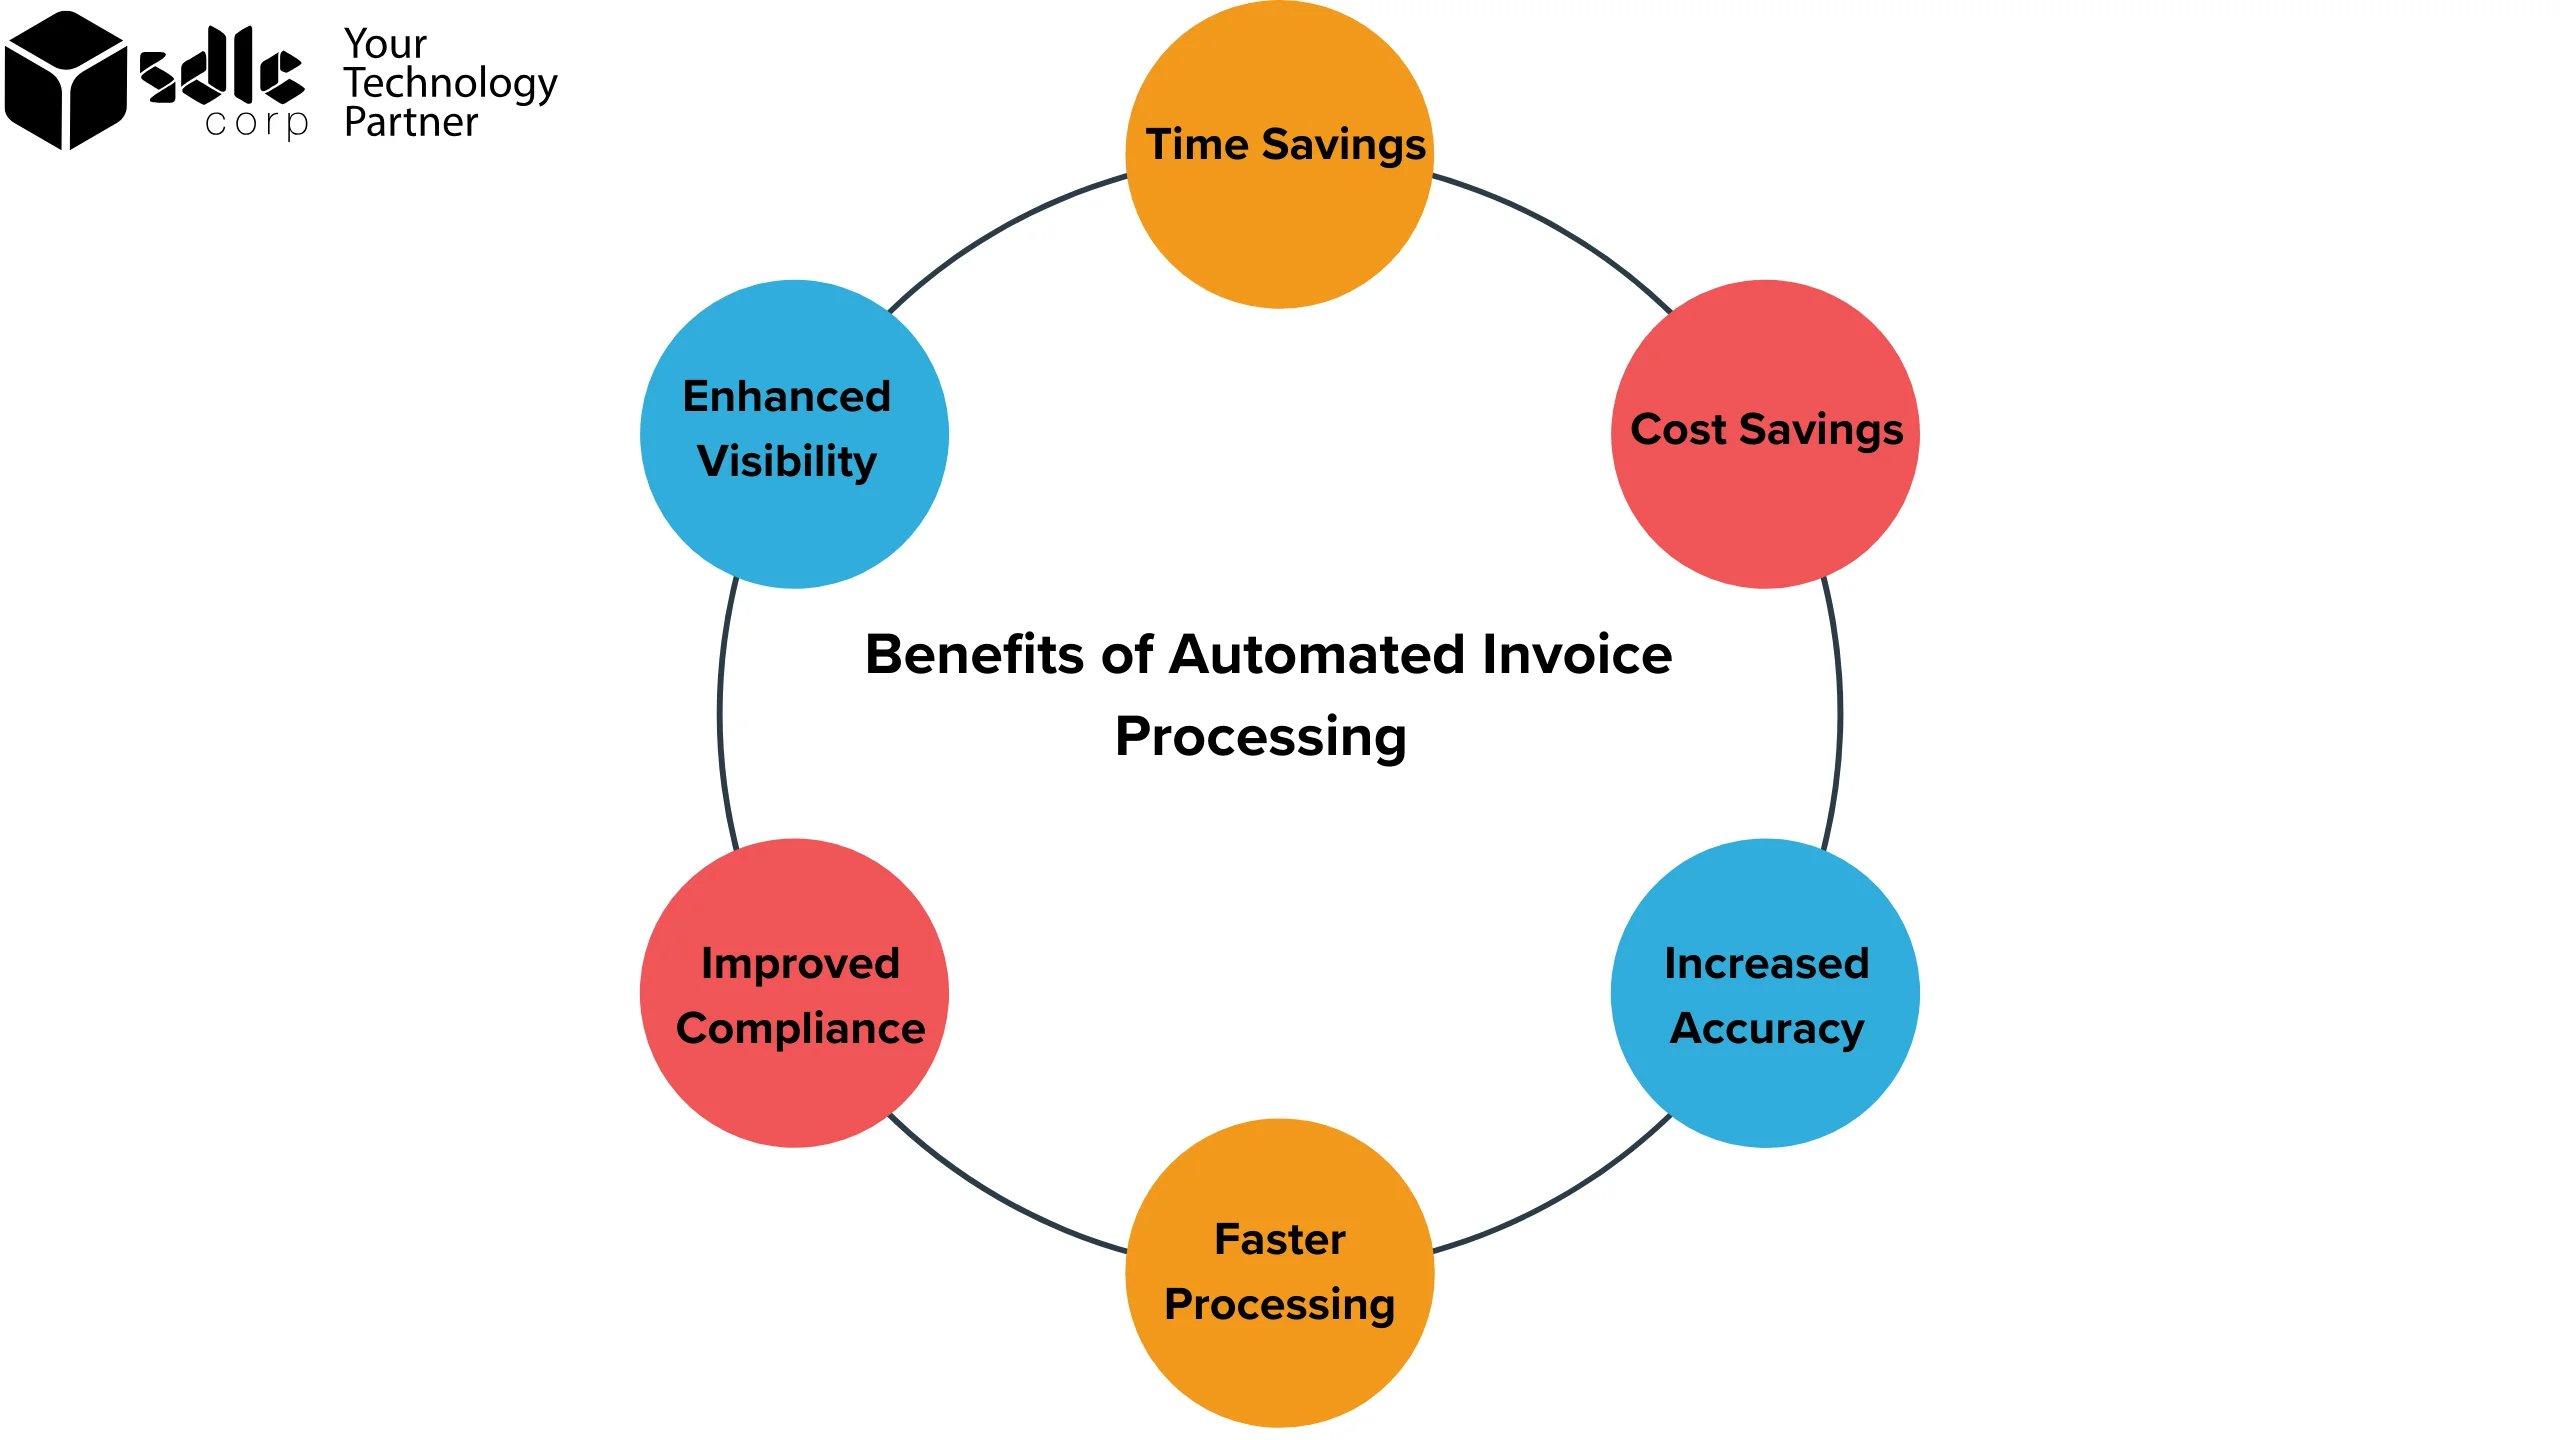 Automated invoice processing offers a wide range of benefits